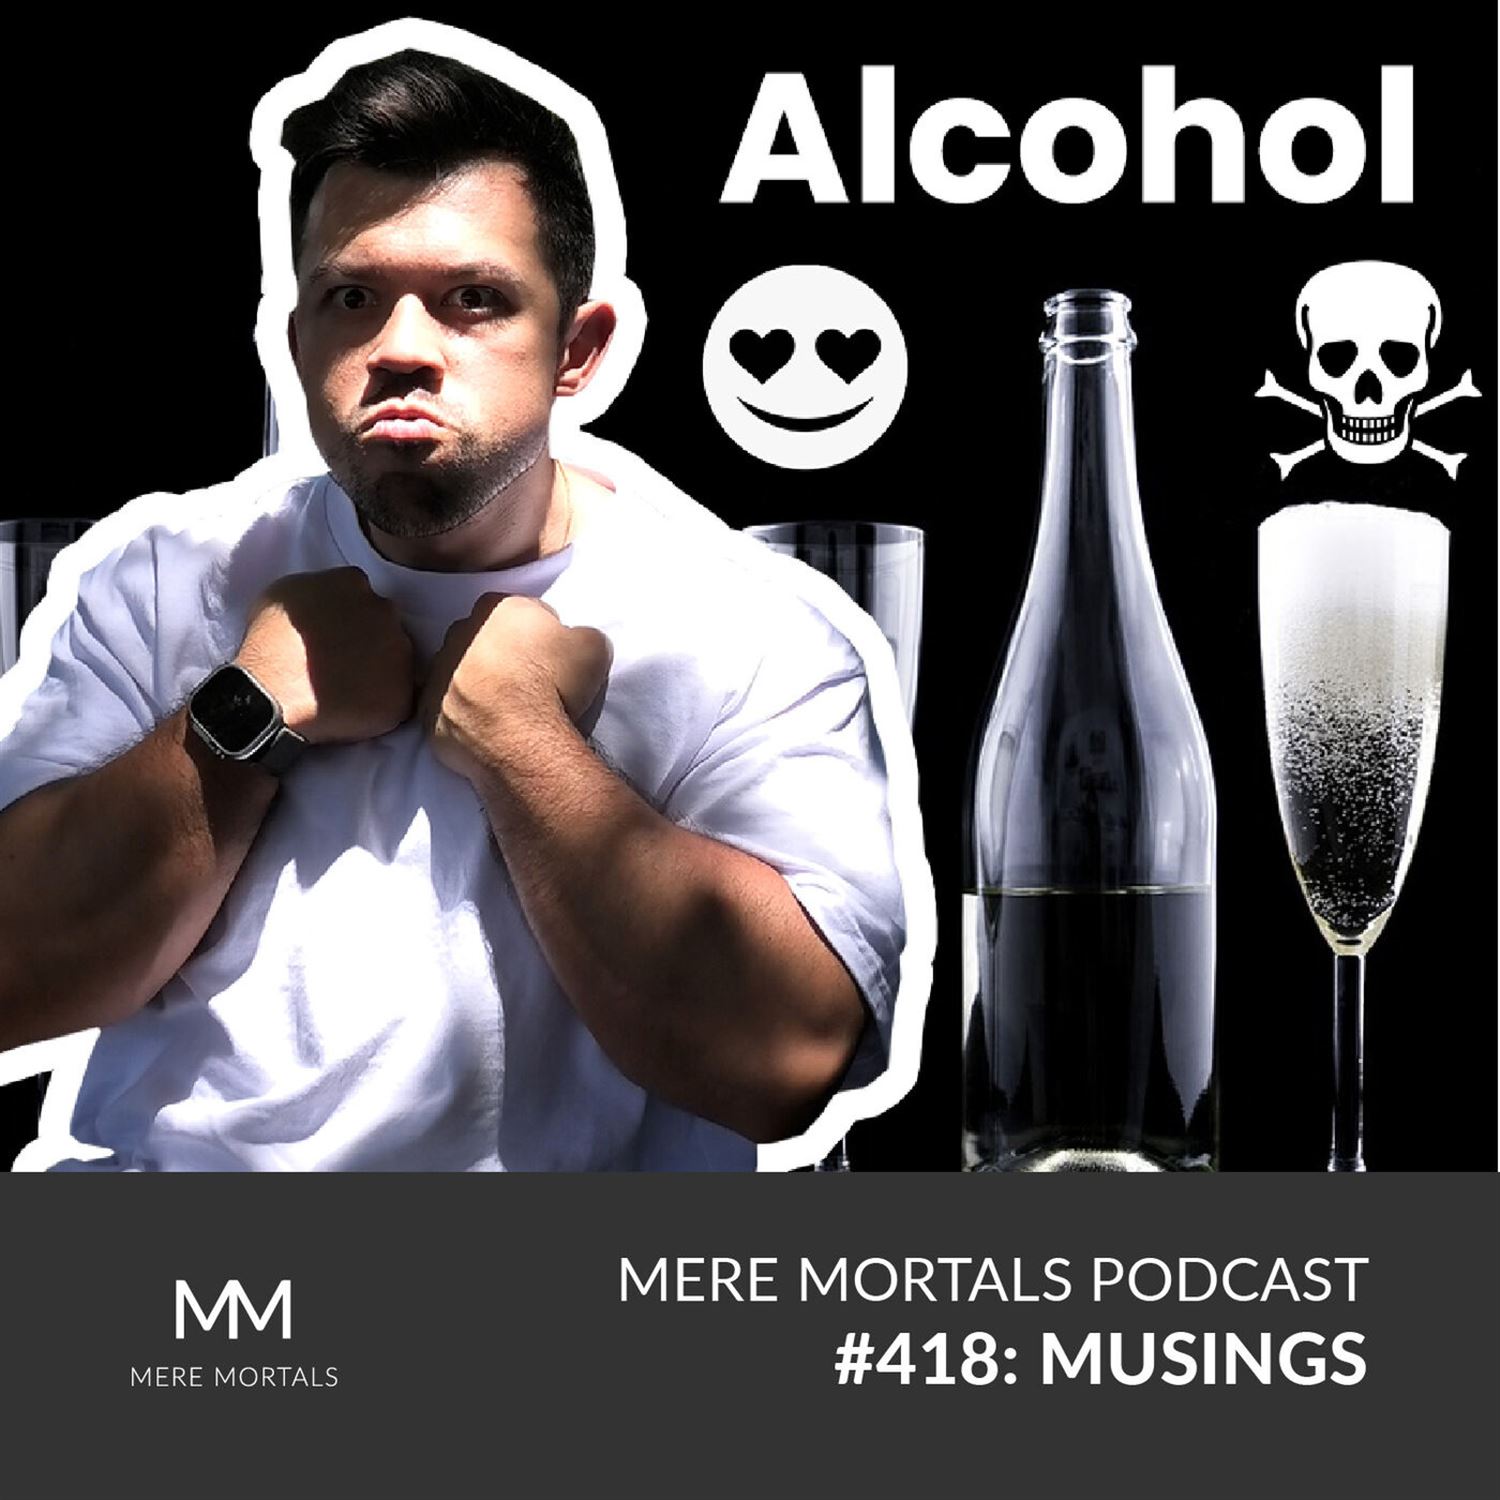 The Pro & Cons Of Alcohol | Does It Make Our Life Better?